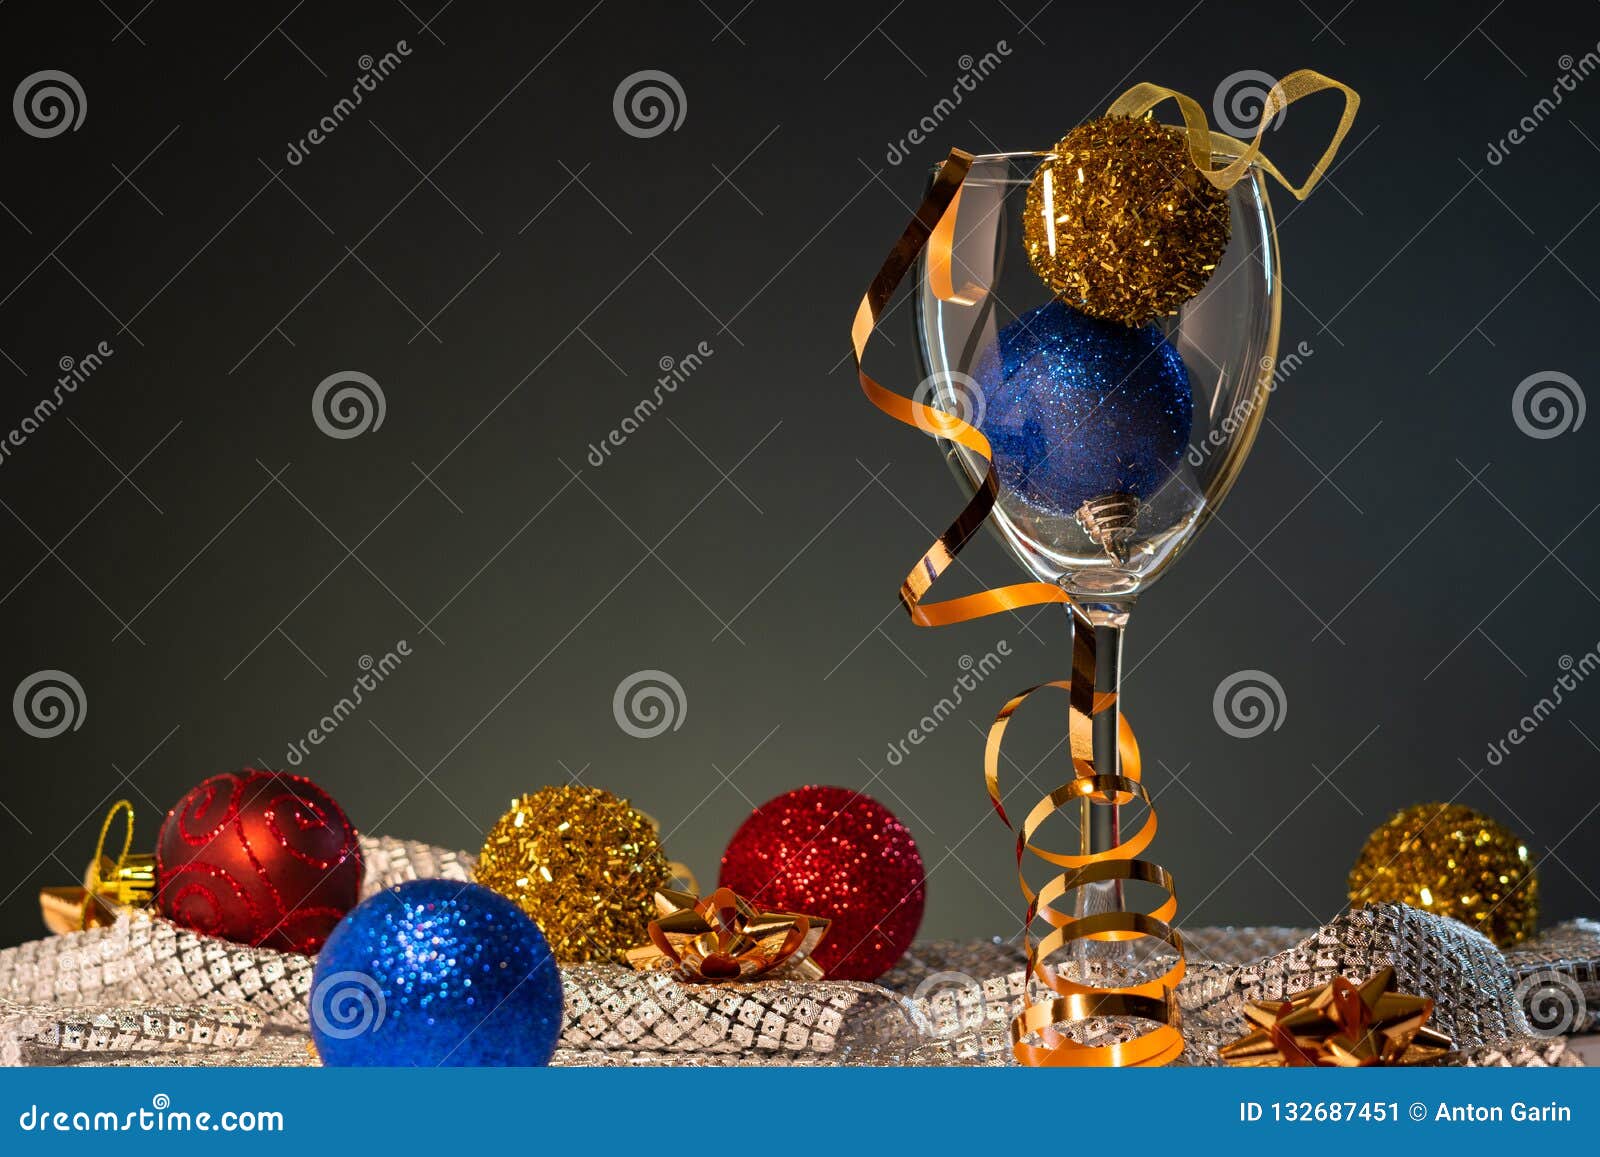 christmas cards. wine glass with red, blue and gold christmas decorations